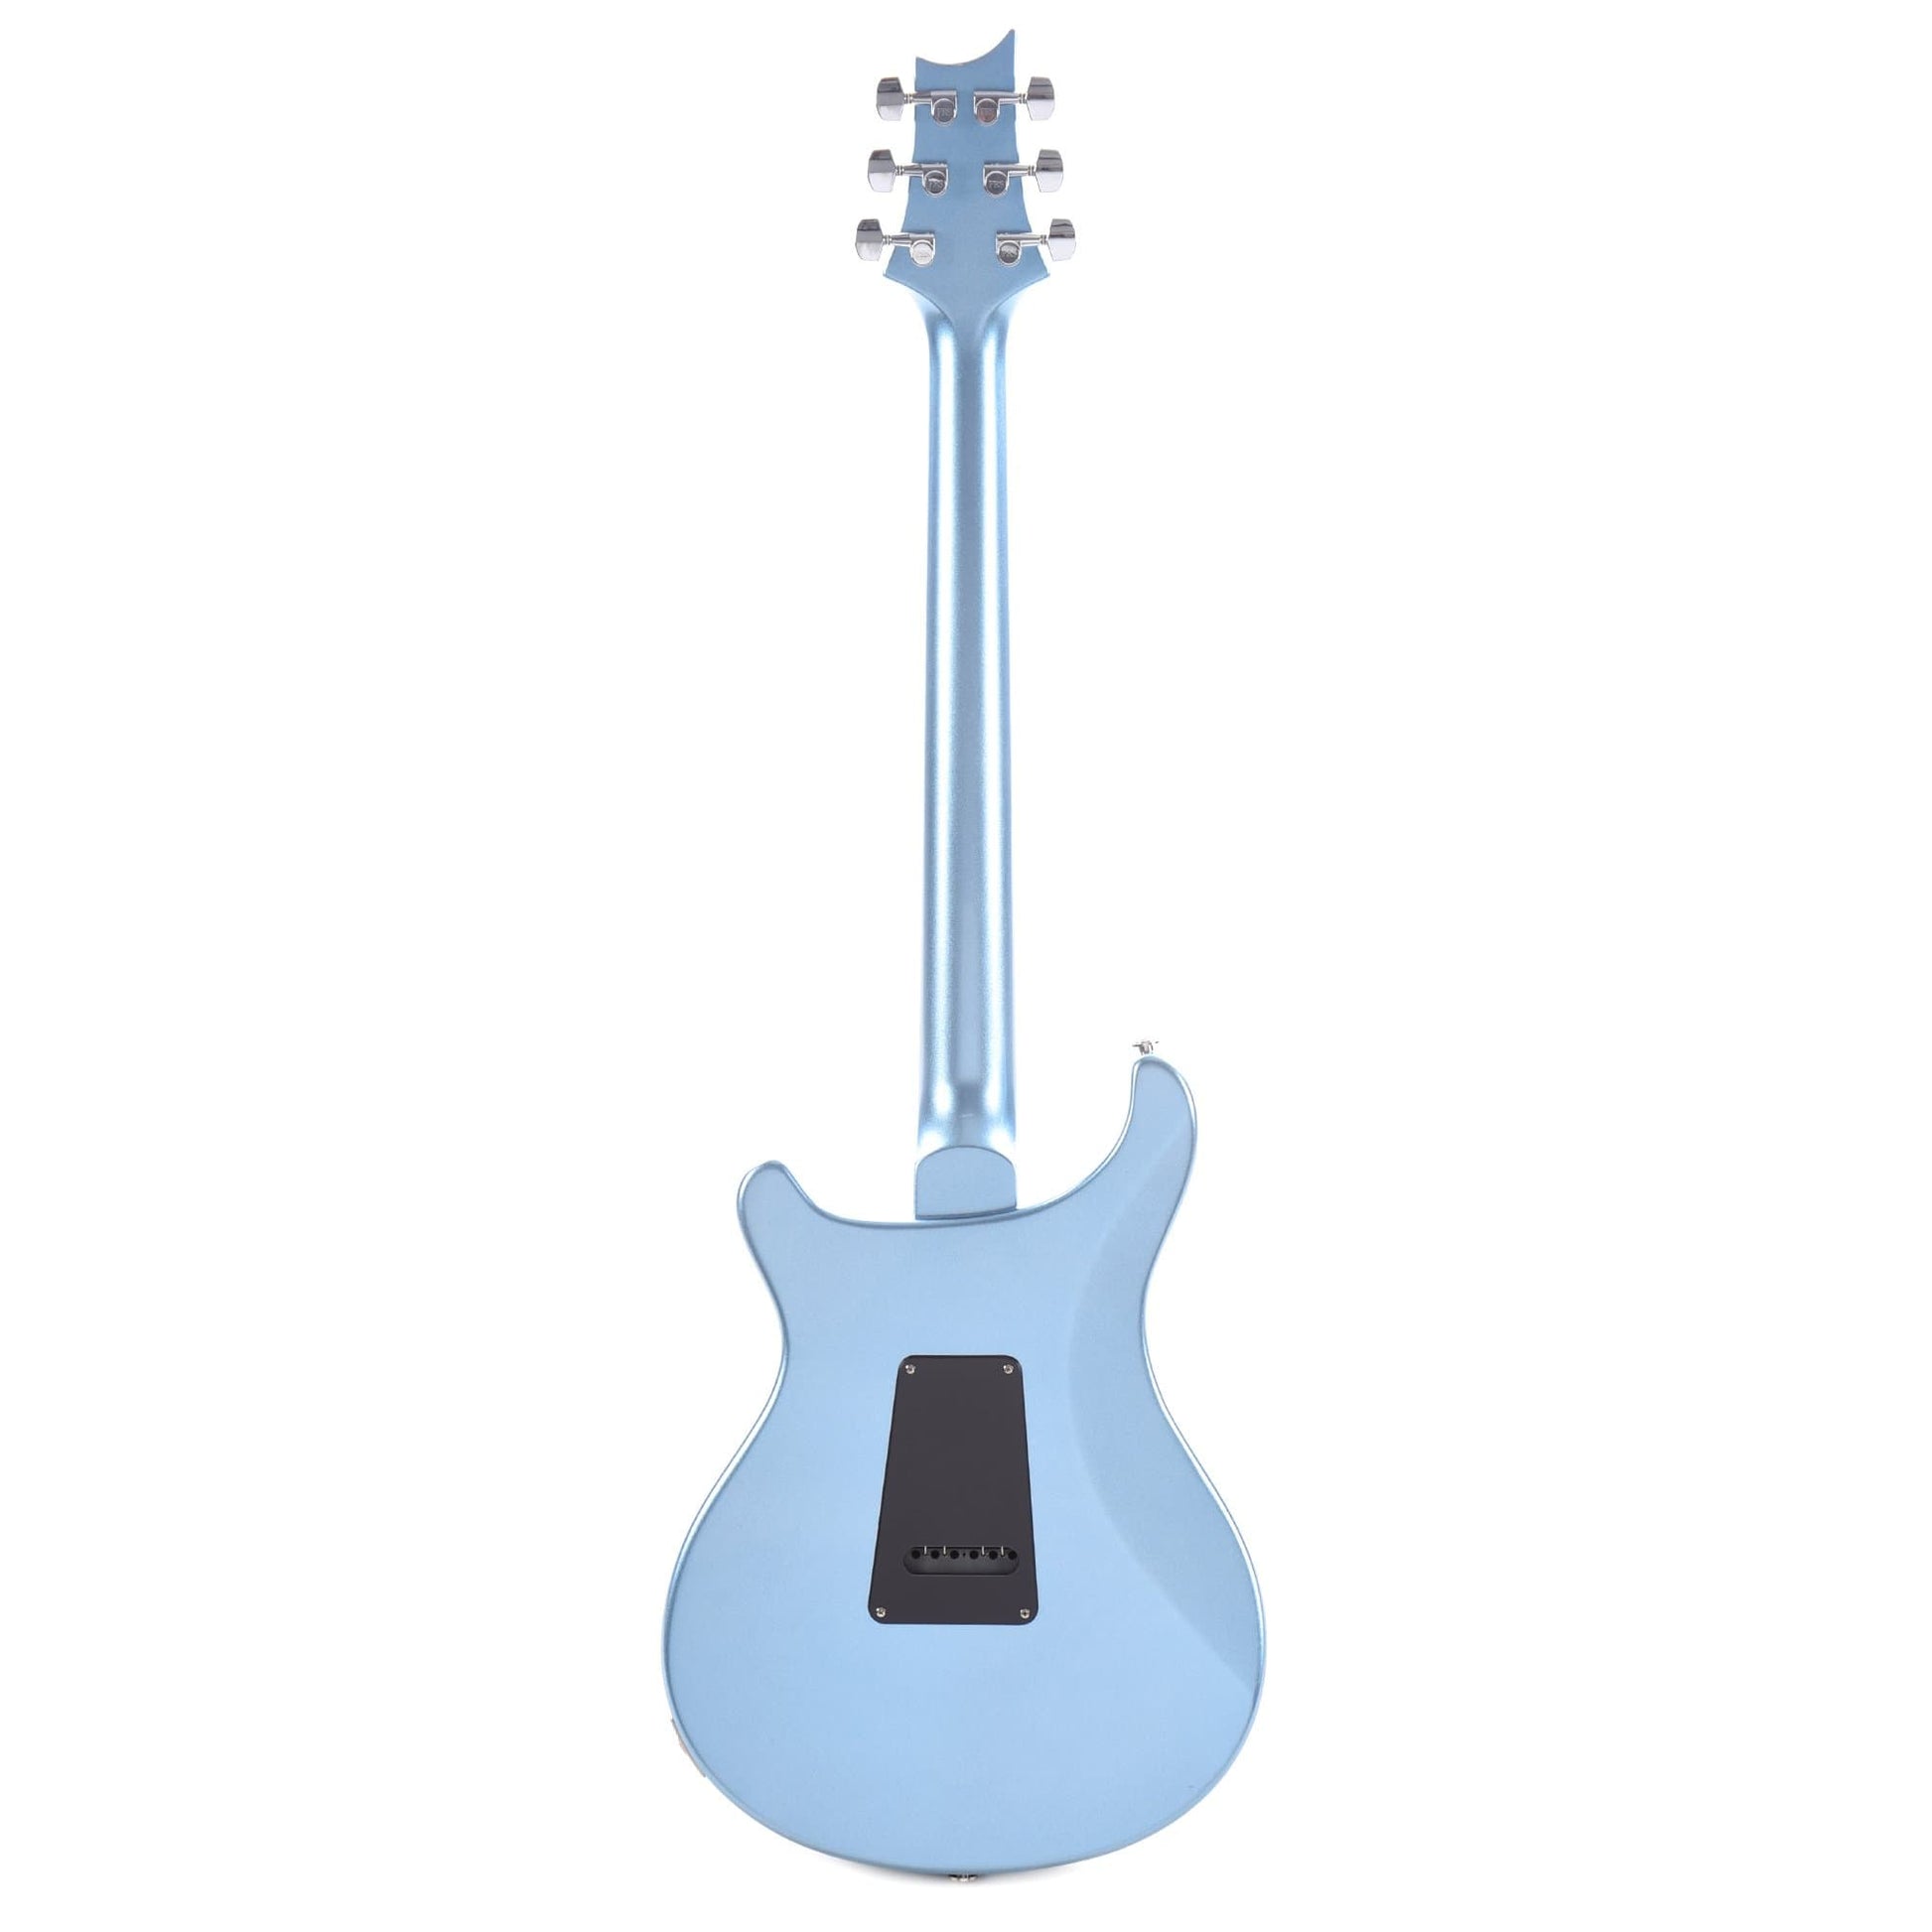 PRS S2 Standard 24 Frost Blue Metallic Electric Guitars / Solid Body